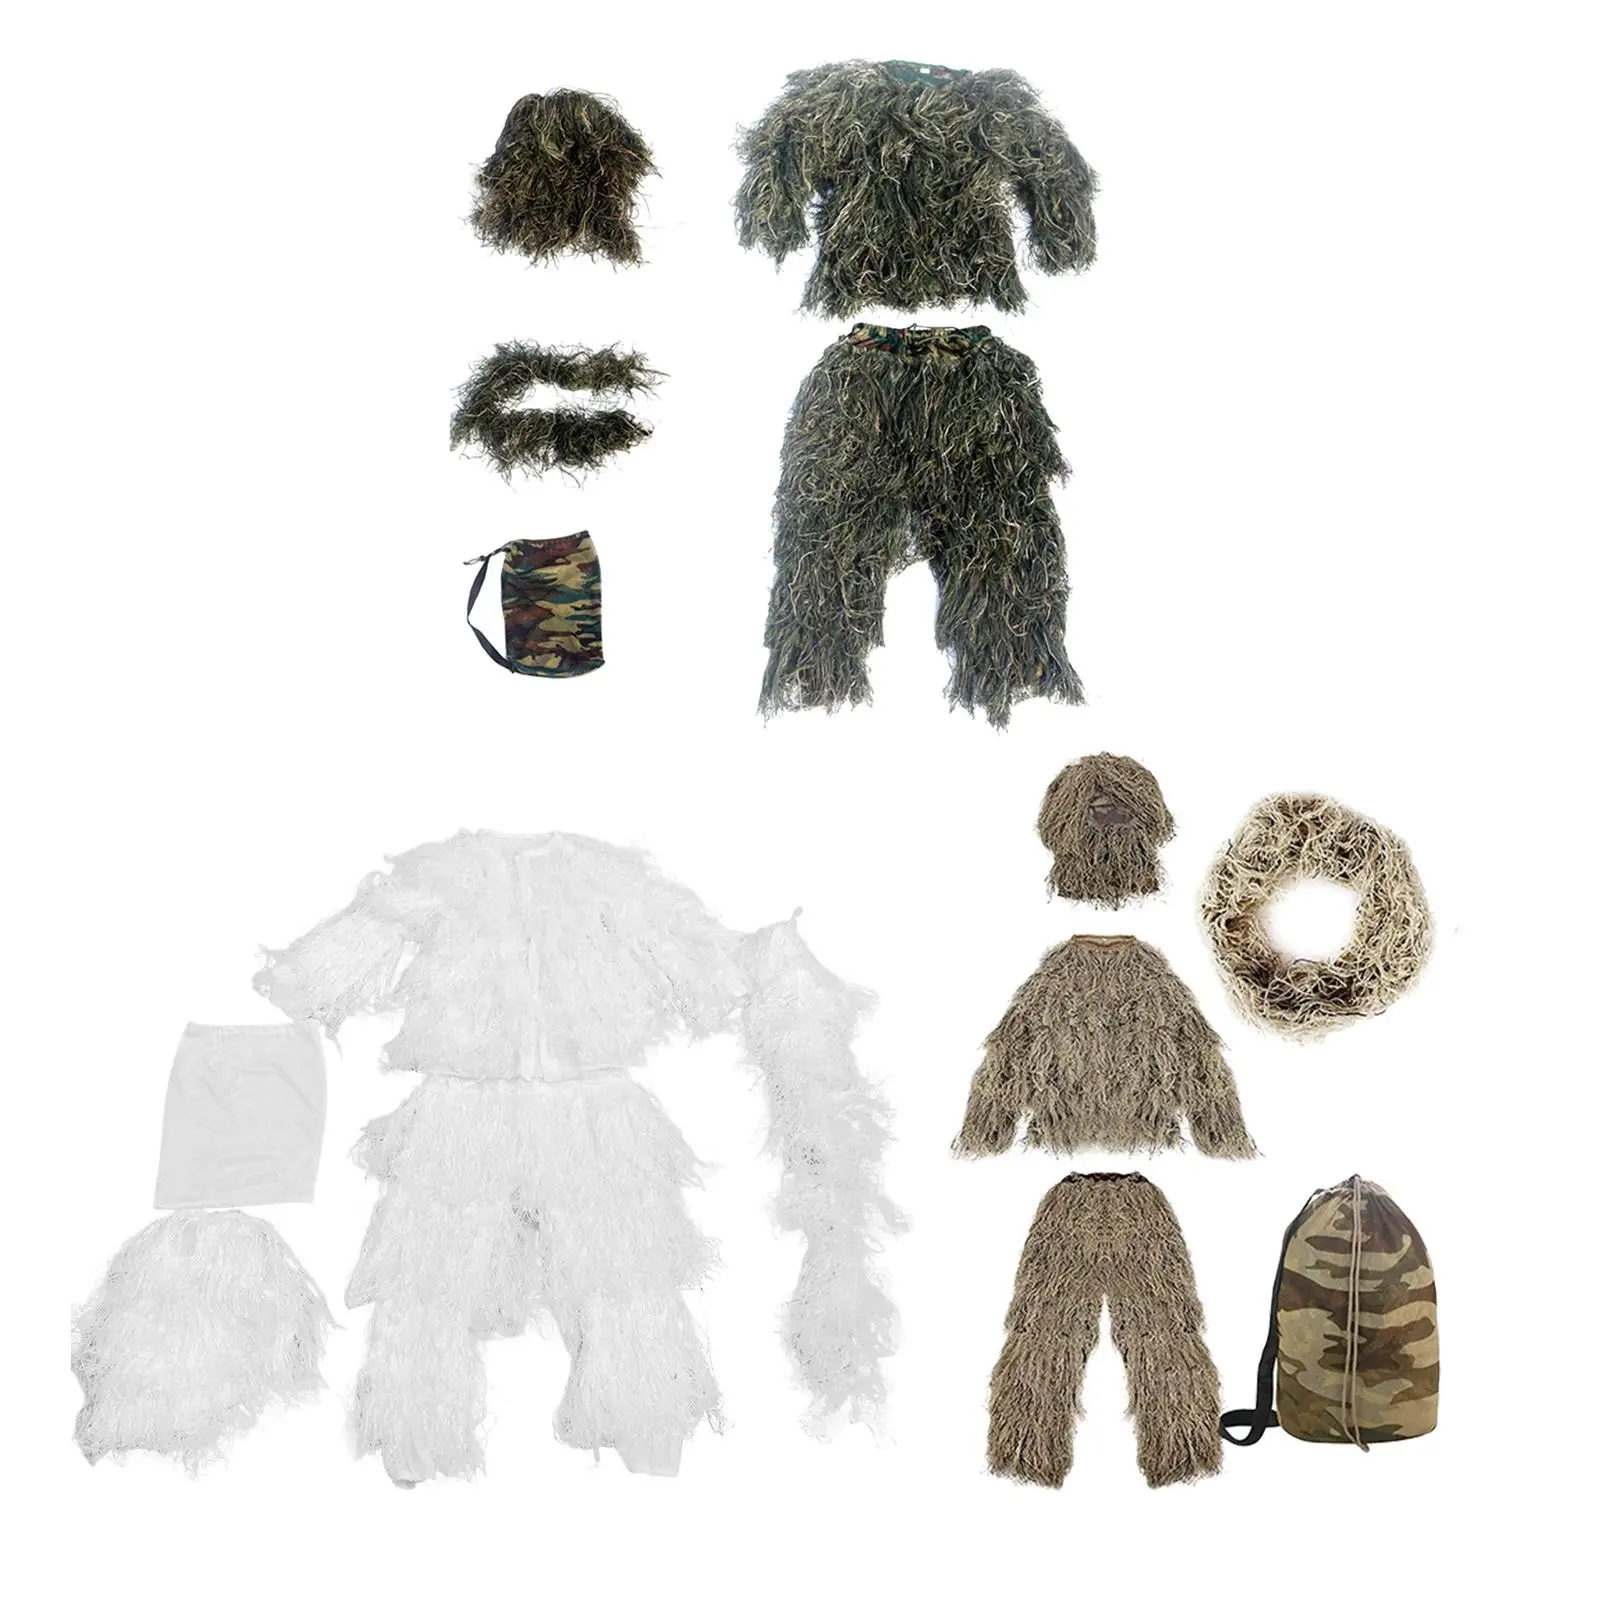 Ghillie Suit Woodland Breathable Disguise Uniform Set with Storage Bag for Game Birdwatching Turkey Hunting Costume Gardening